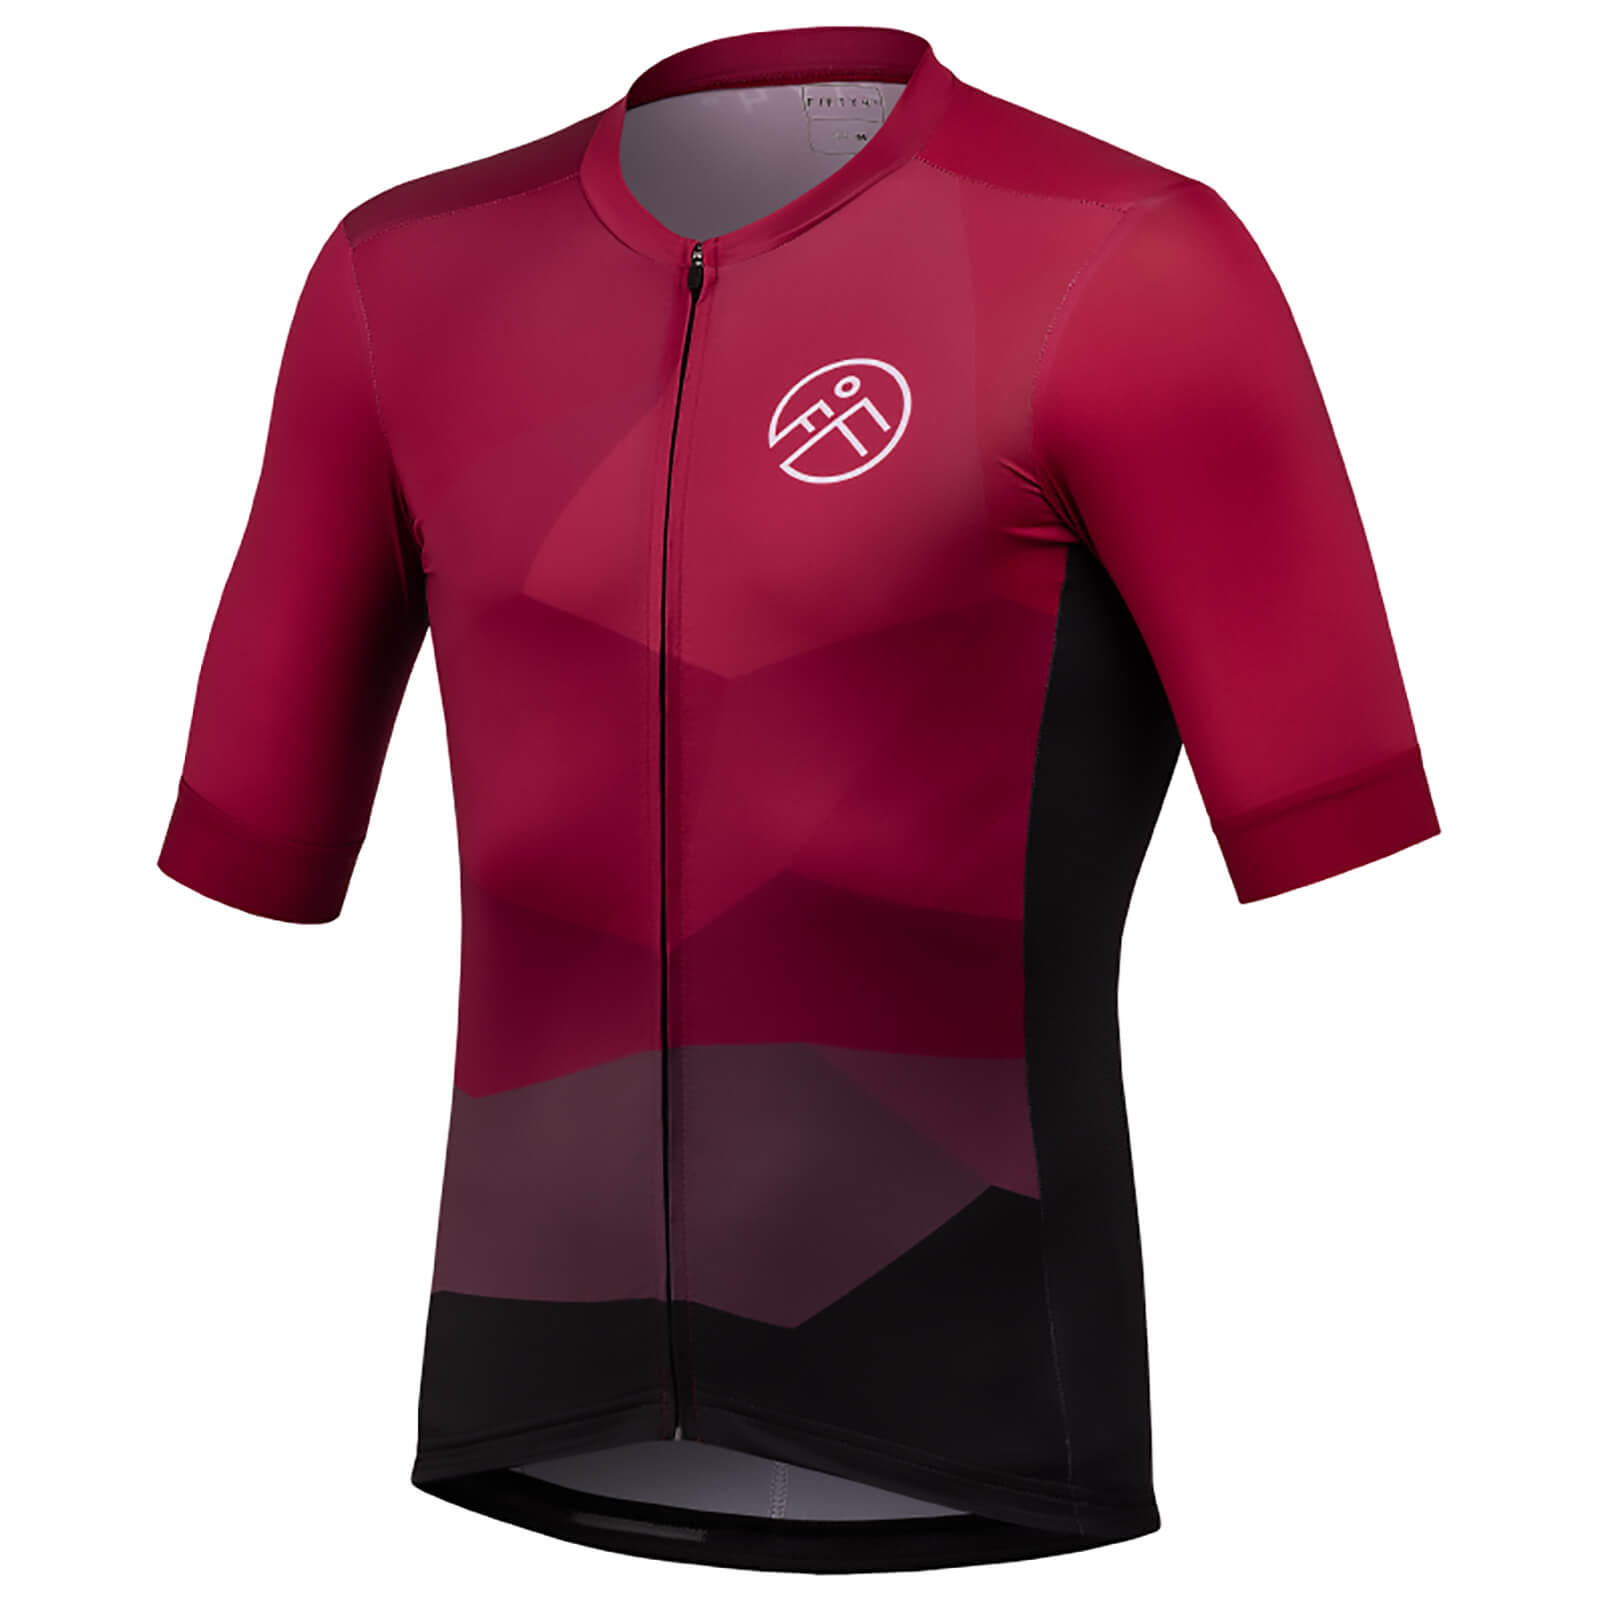 54 Degree Strato Jersey - Burnt Red 